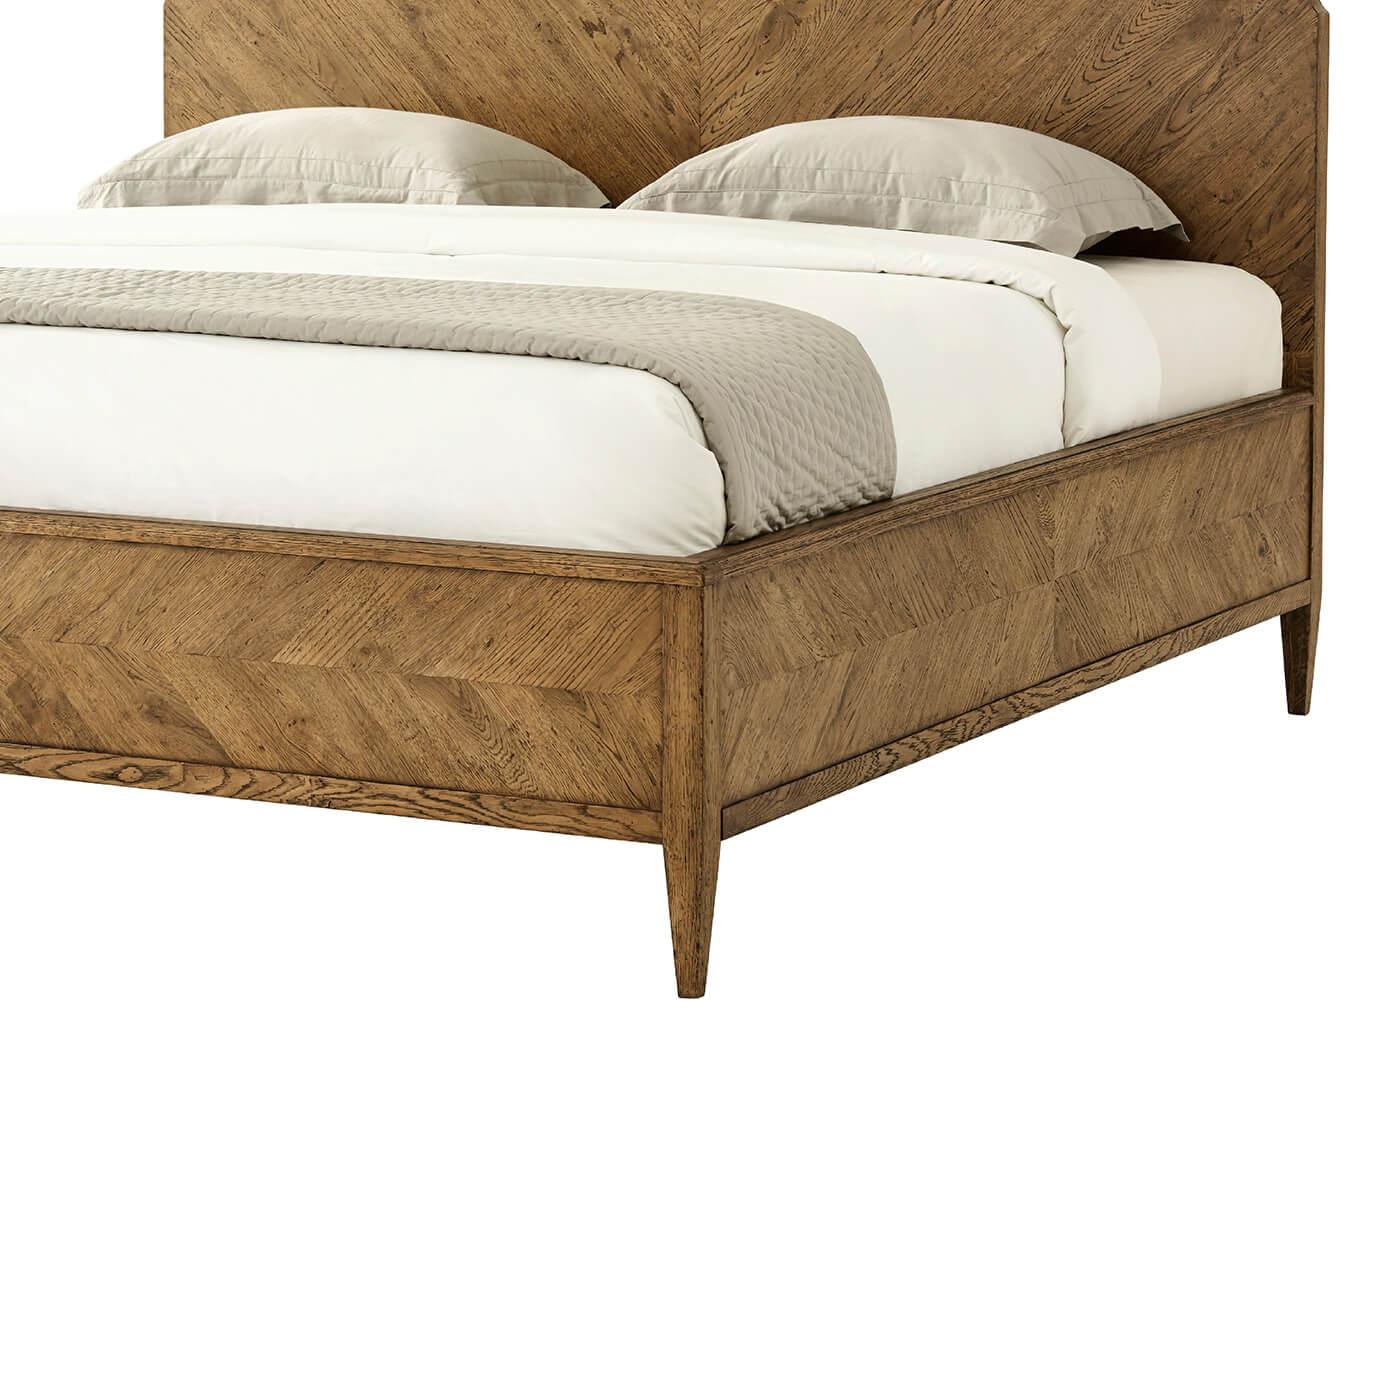 A modern rustic-style oak queen bed with an arched headboard. This artfully crafted bed has been hand-veneered. It has been crafted with rustic oak and is shown in our striking Dawn finish. 

Shown in Dawn Finish
For US Queen mattress - 60